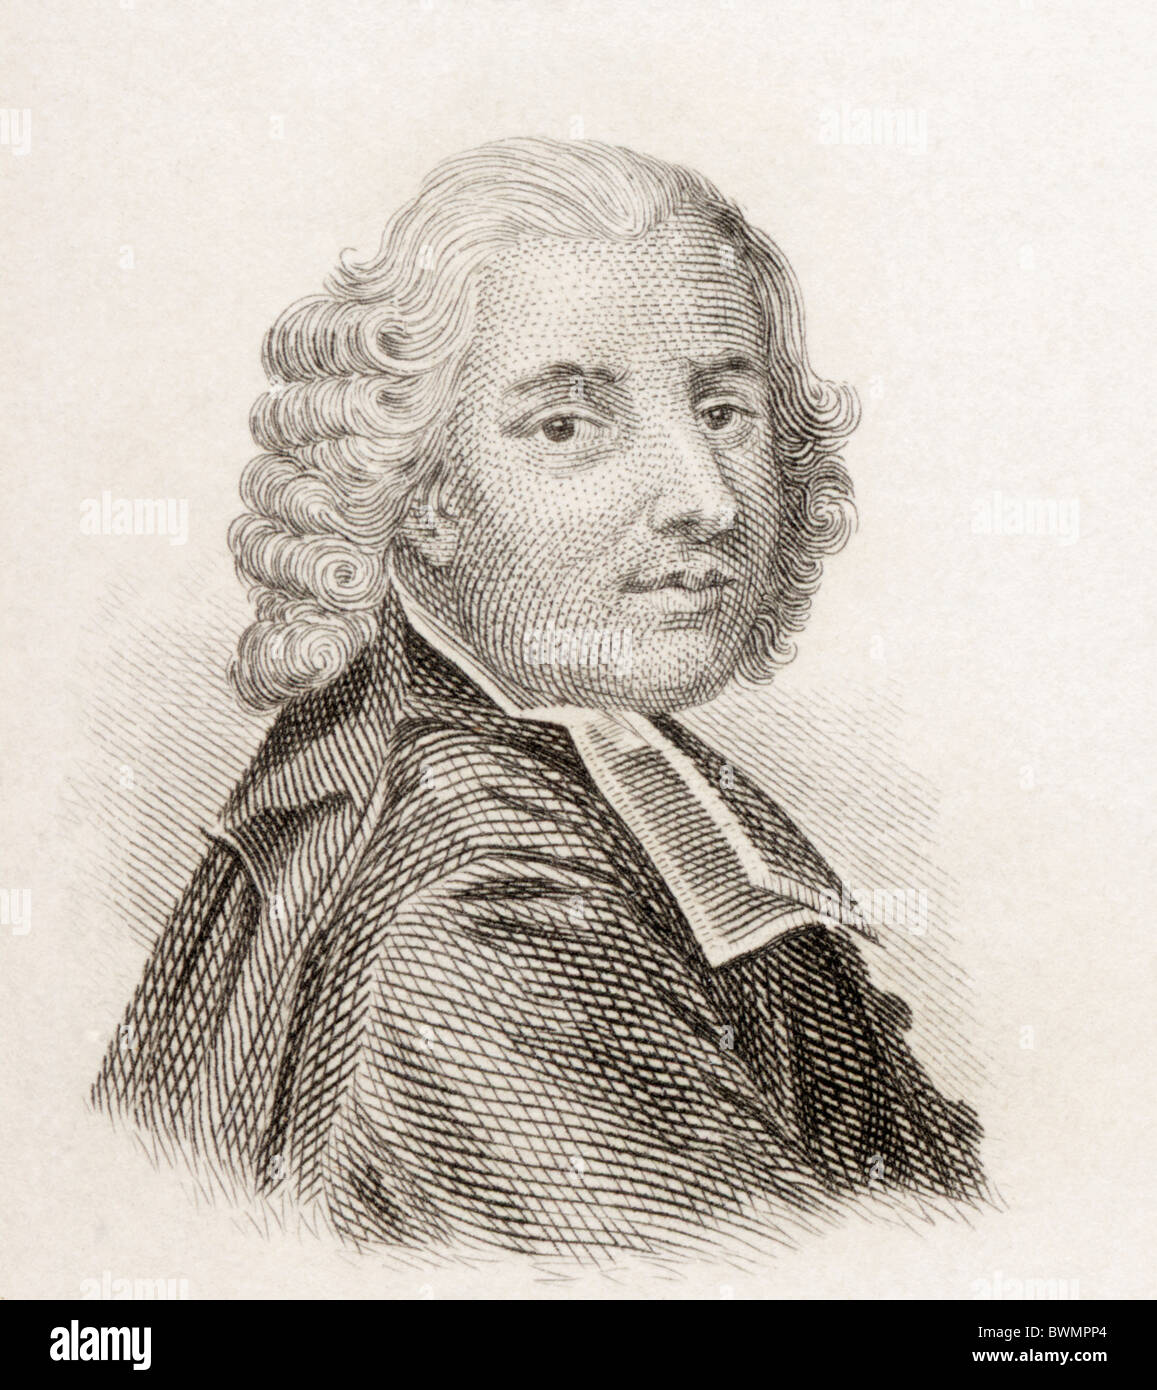 Pierre-Joseph Thoulier d'Olivet, Abbot of Olivet, 1682 to 1768. French abbot, writer, grammarian and French translator. Stock Photo